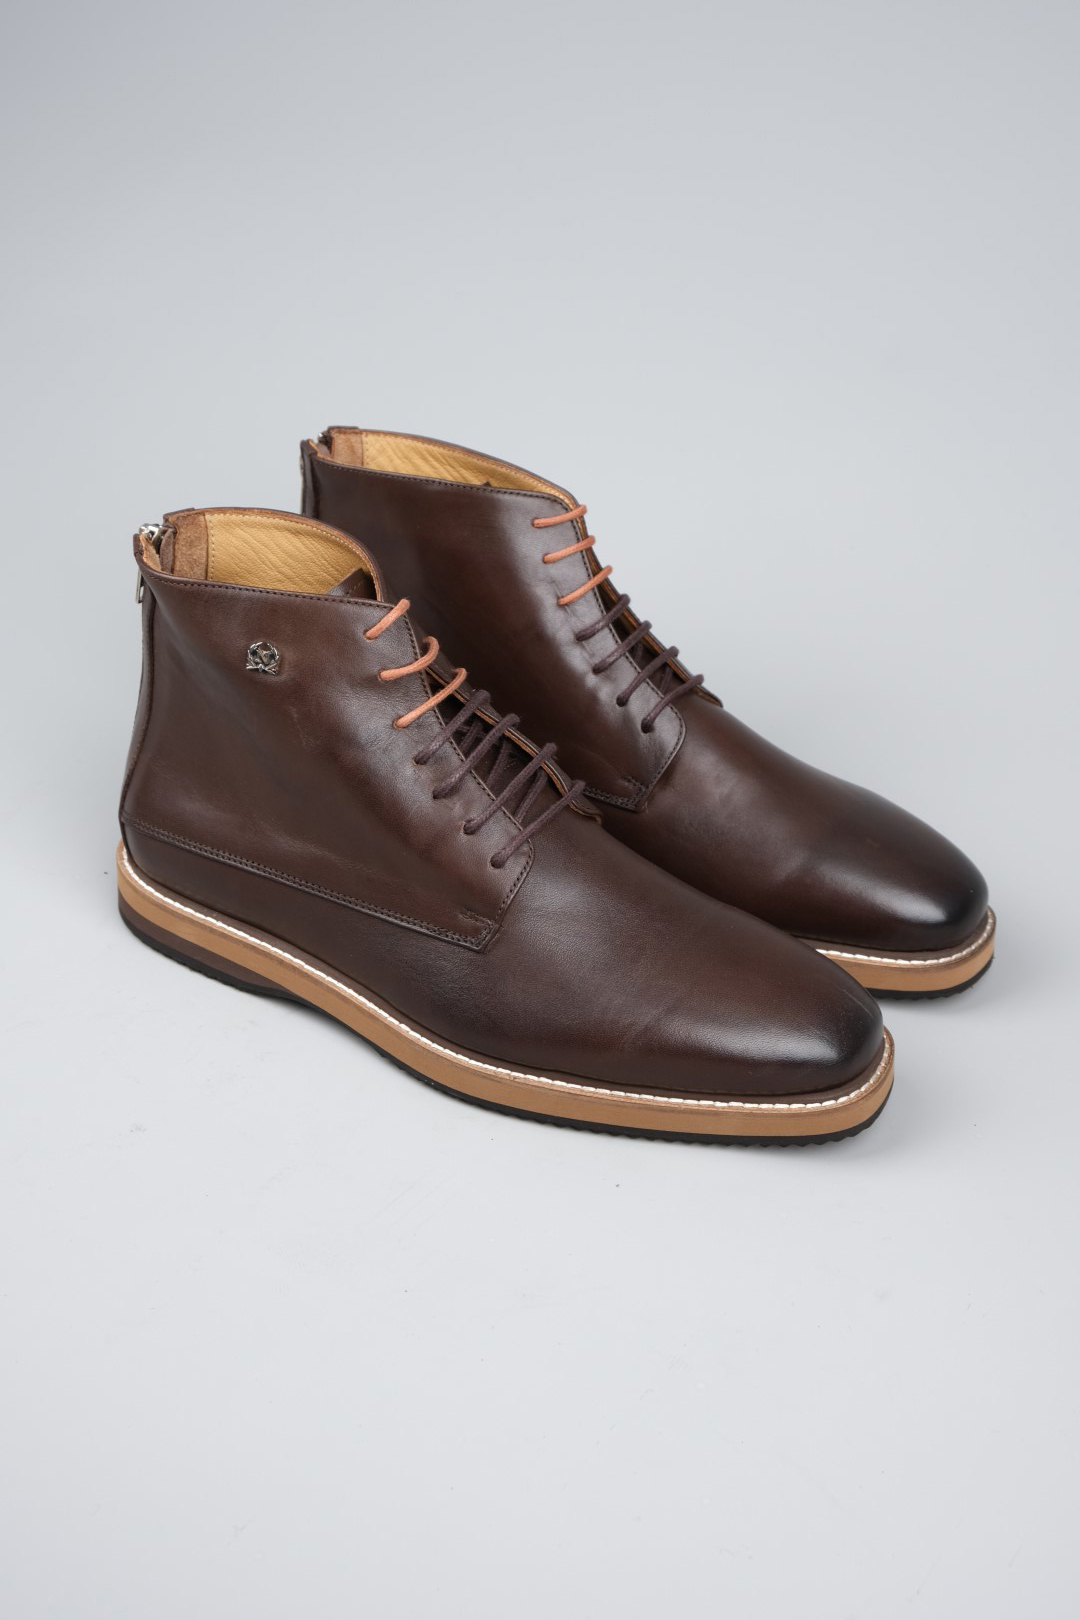 LEATHER BOOTS - BROWN - 2